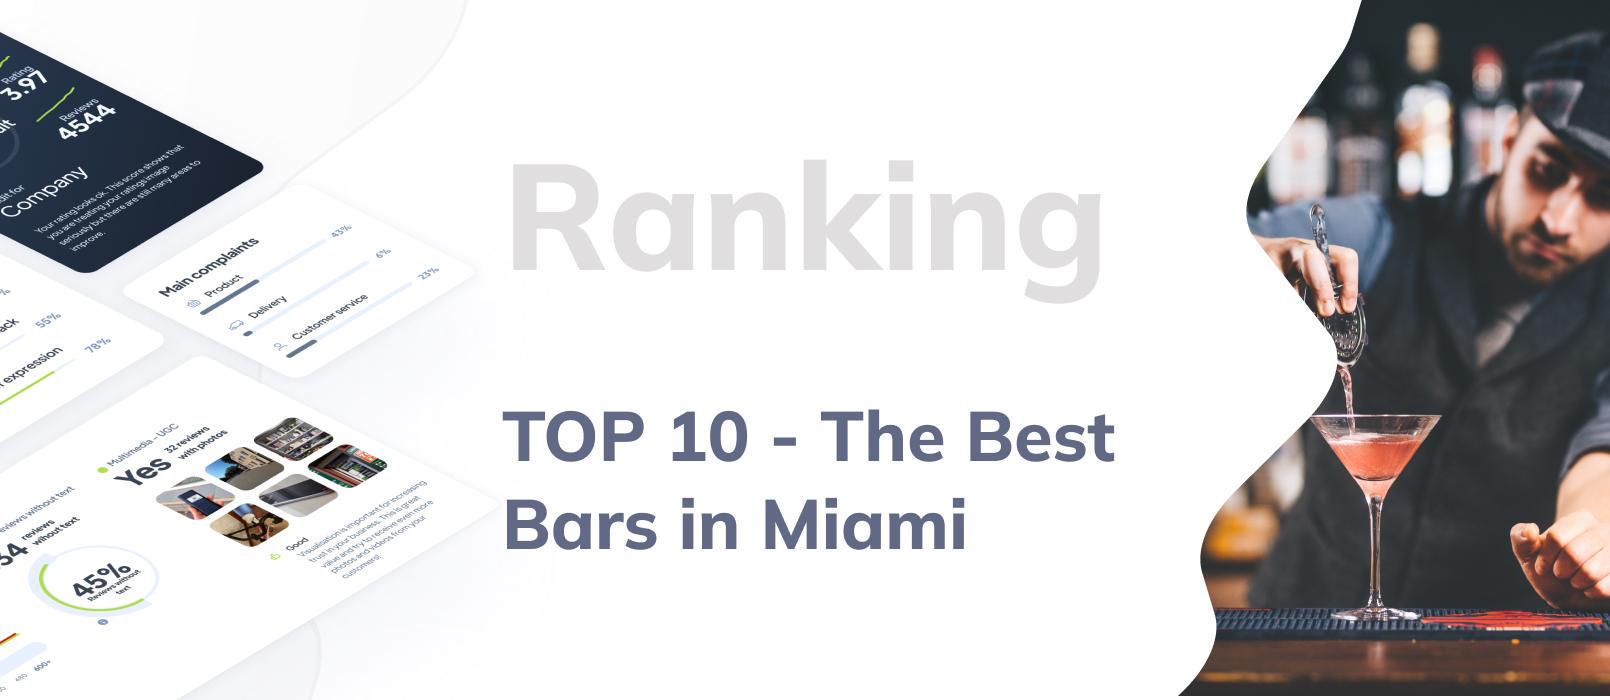 What are the Best Bars in Miami? Ranking of the TOP 10 Best Bars in Miami.